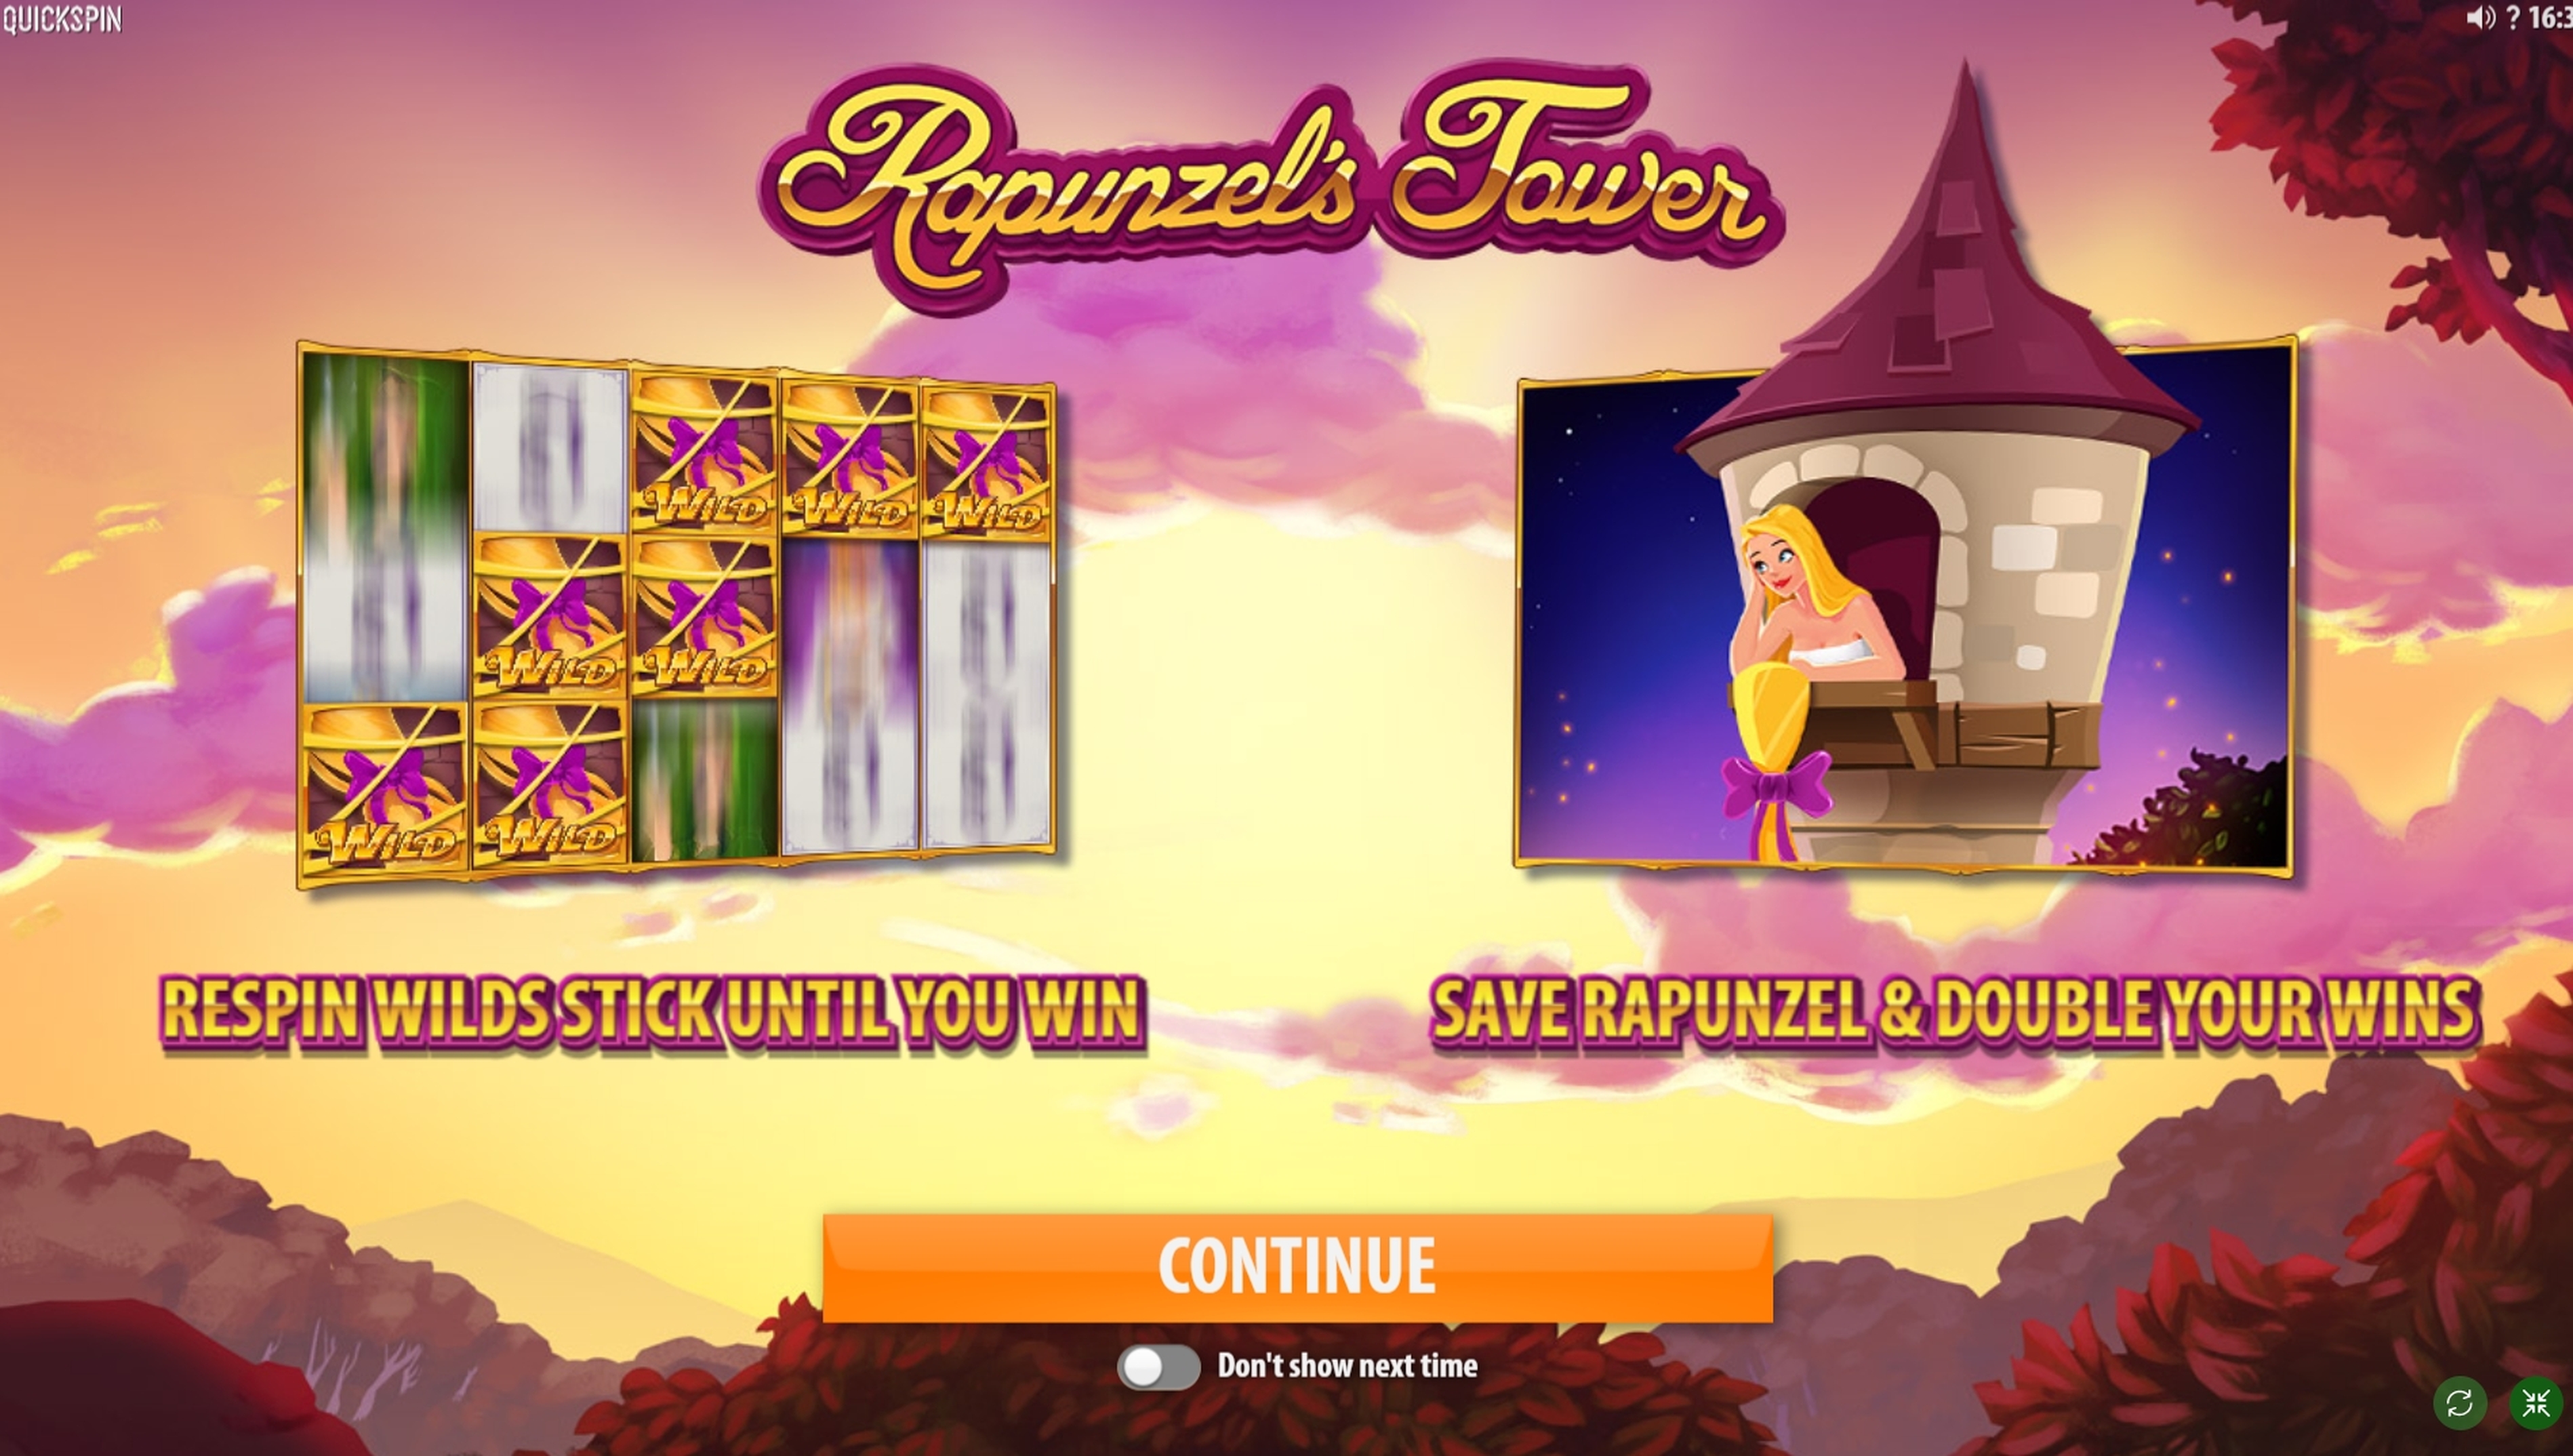 Play Rapunzel's Tower Free Casino Slot Game by Quickspin